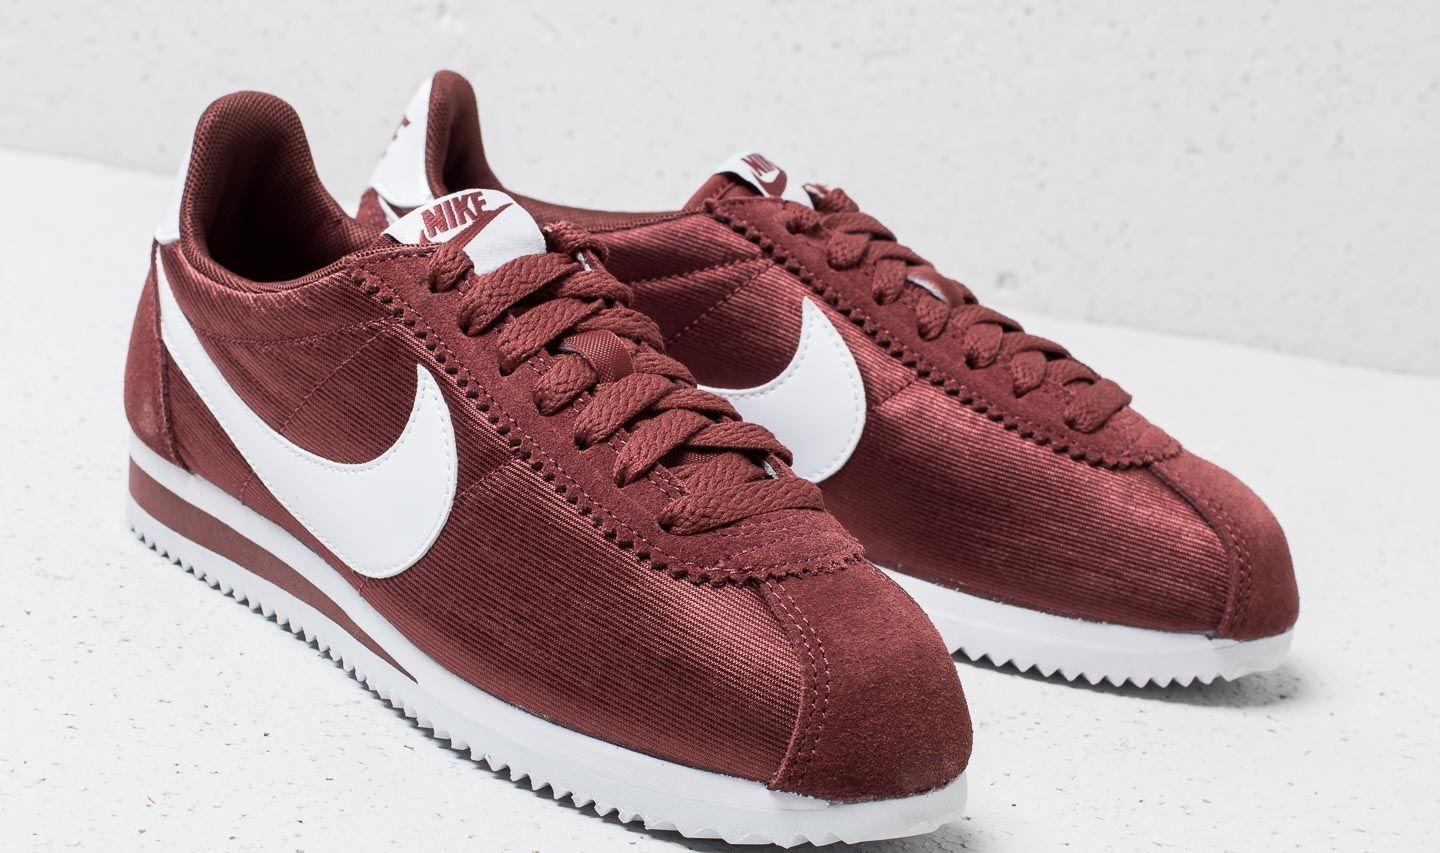 nike classic cortez nylon red buy clothes shoes online